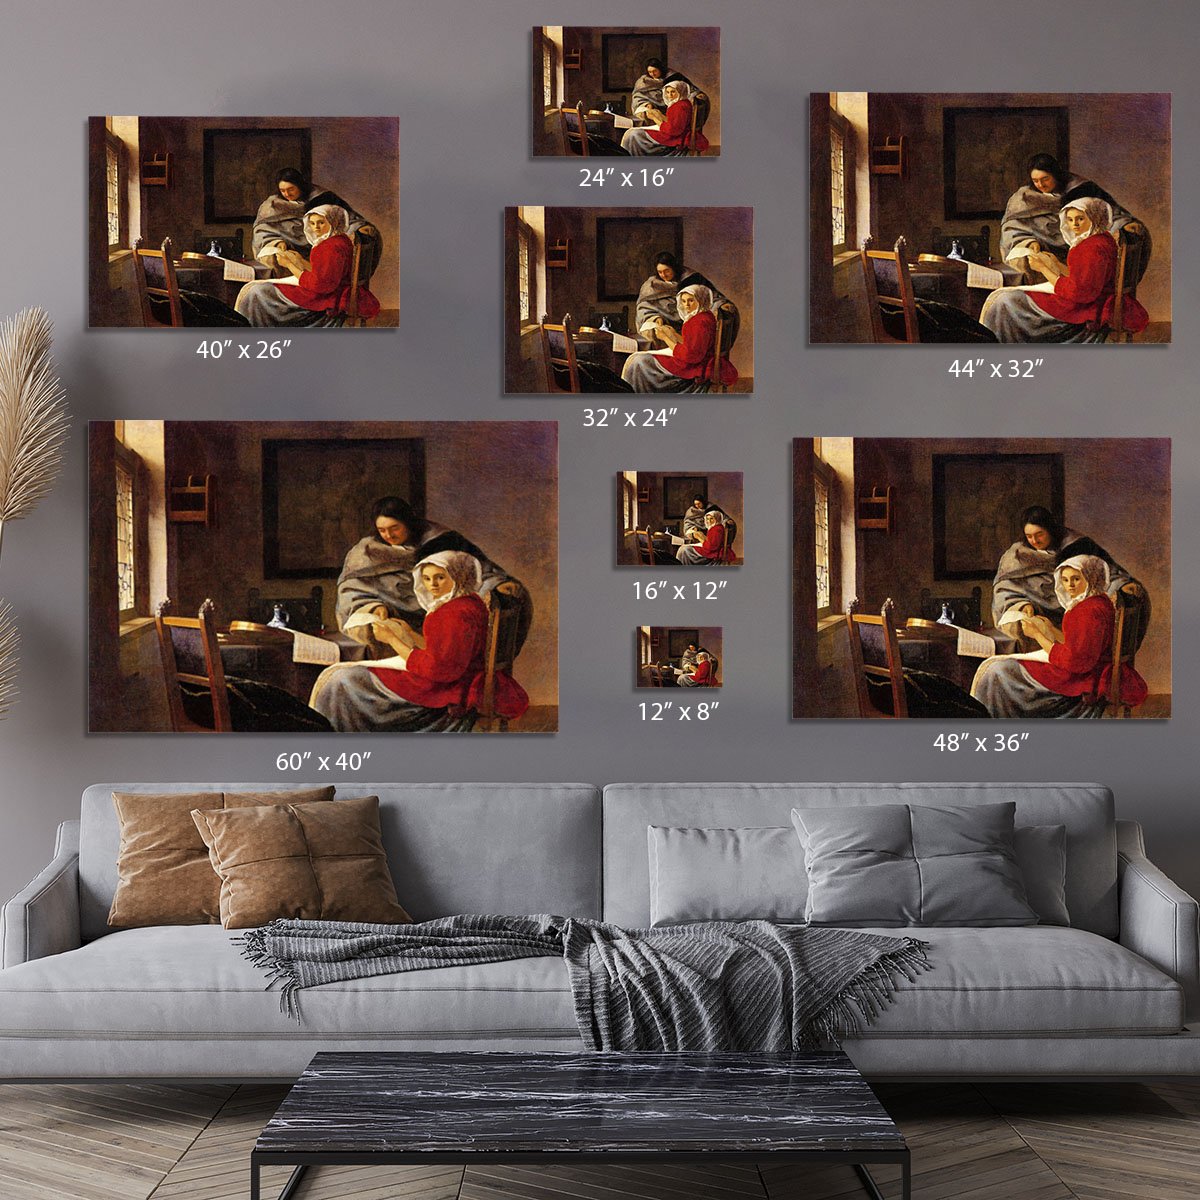 Girl interrupted in her music Canvas Print or Poster